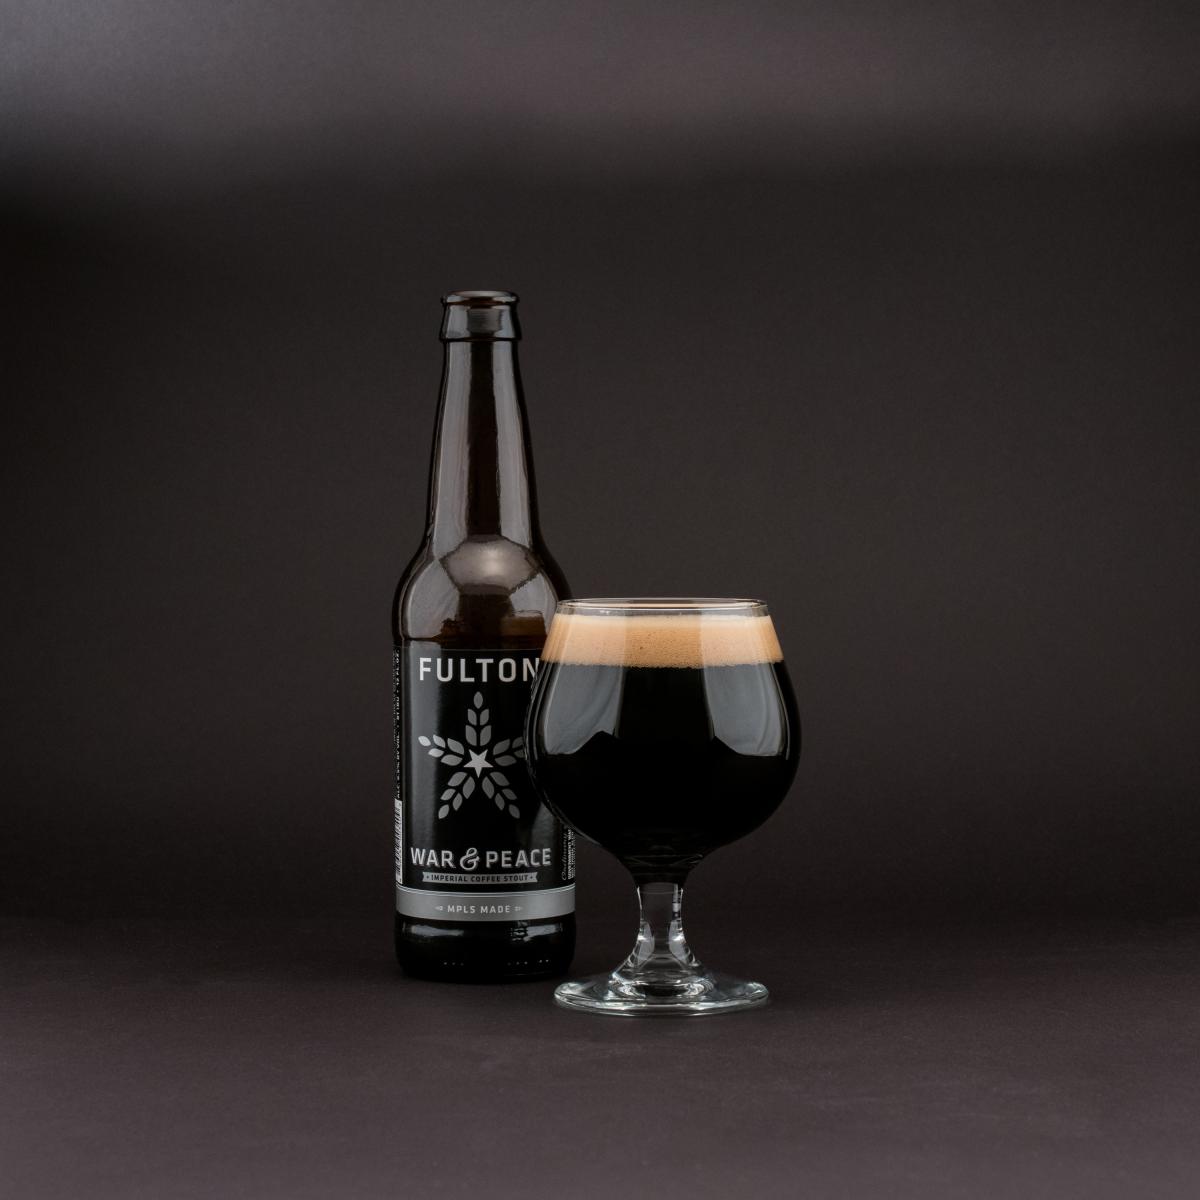 War & Peace Imperial Coffee Stout